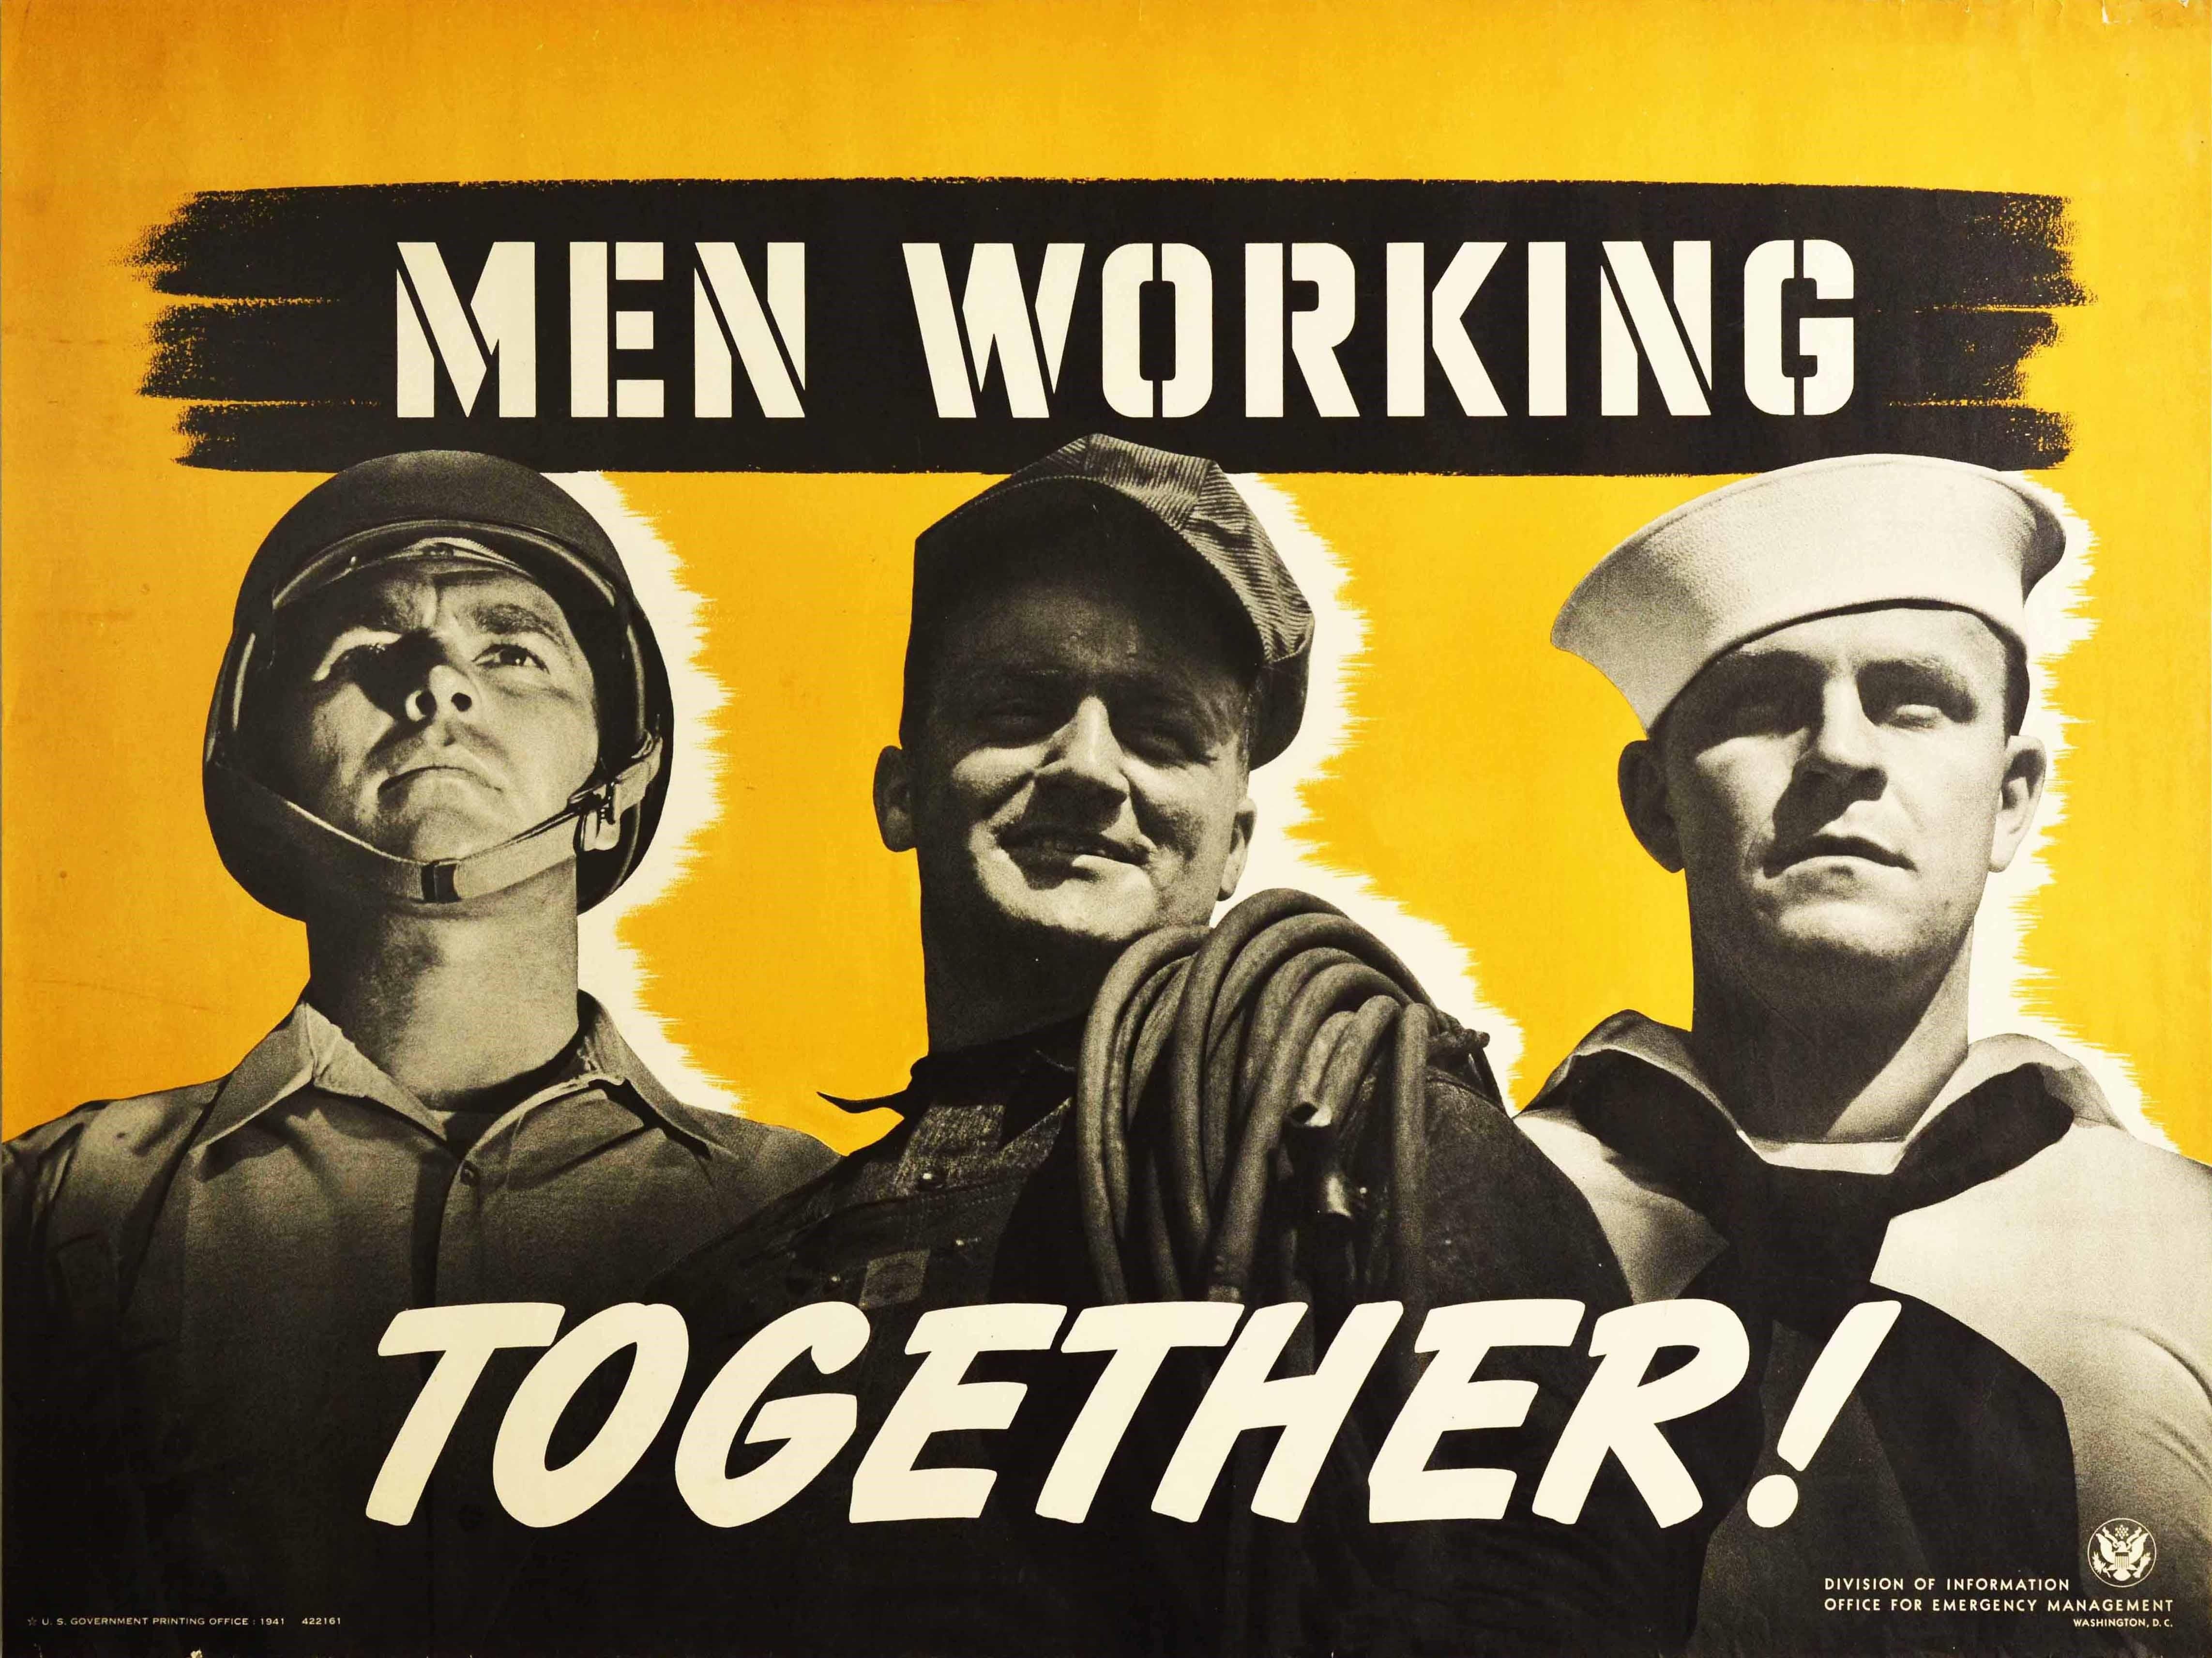 Original vintage World War Two poster - Men Working Together! - featuring a US Army soldier and Navy sailor in military uniform standing behind a smiling factory worker with rubber pipes over his shoulder in front of a yellow shaded background, the